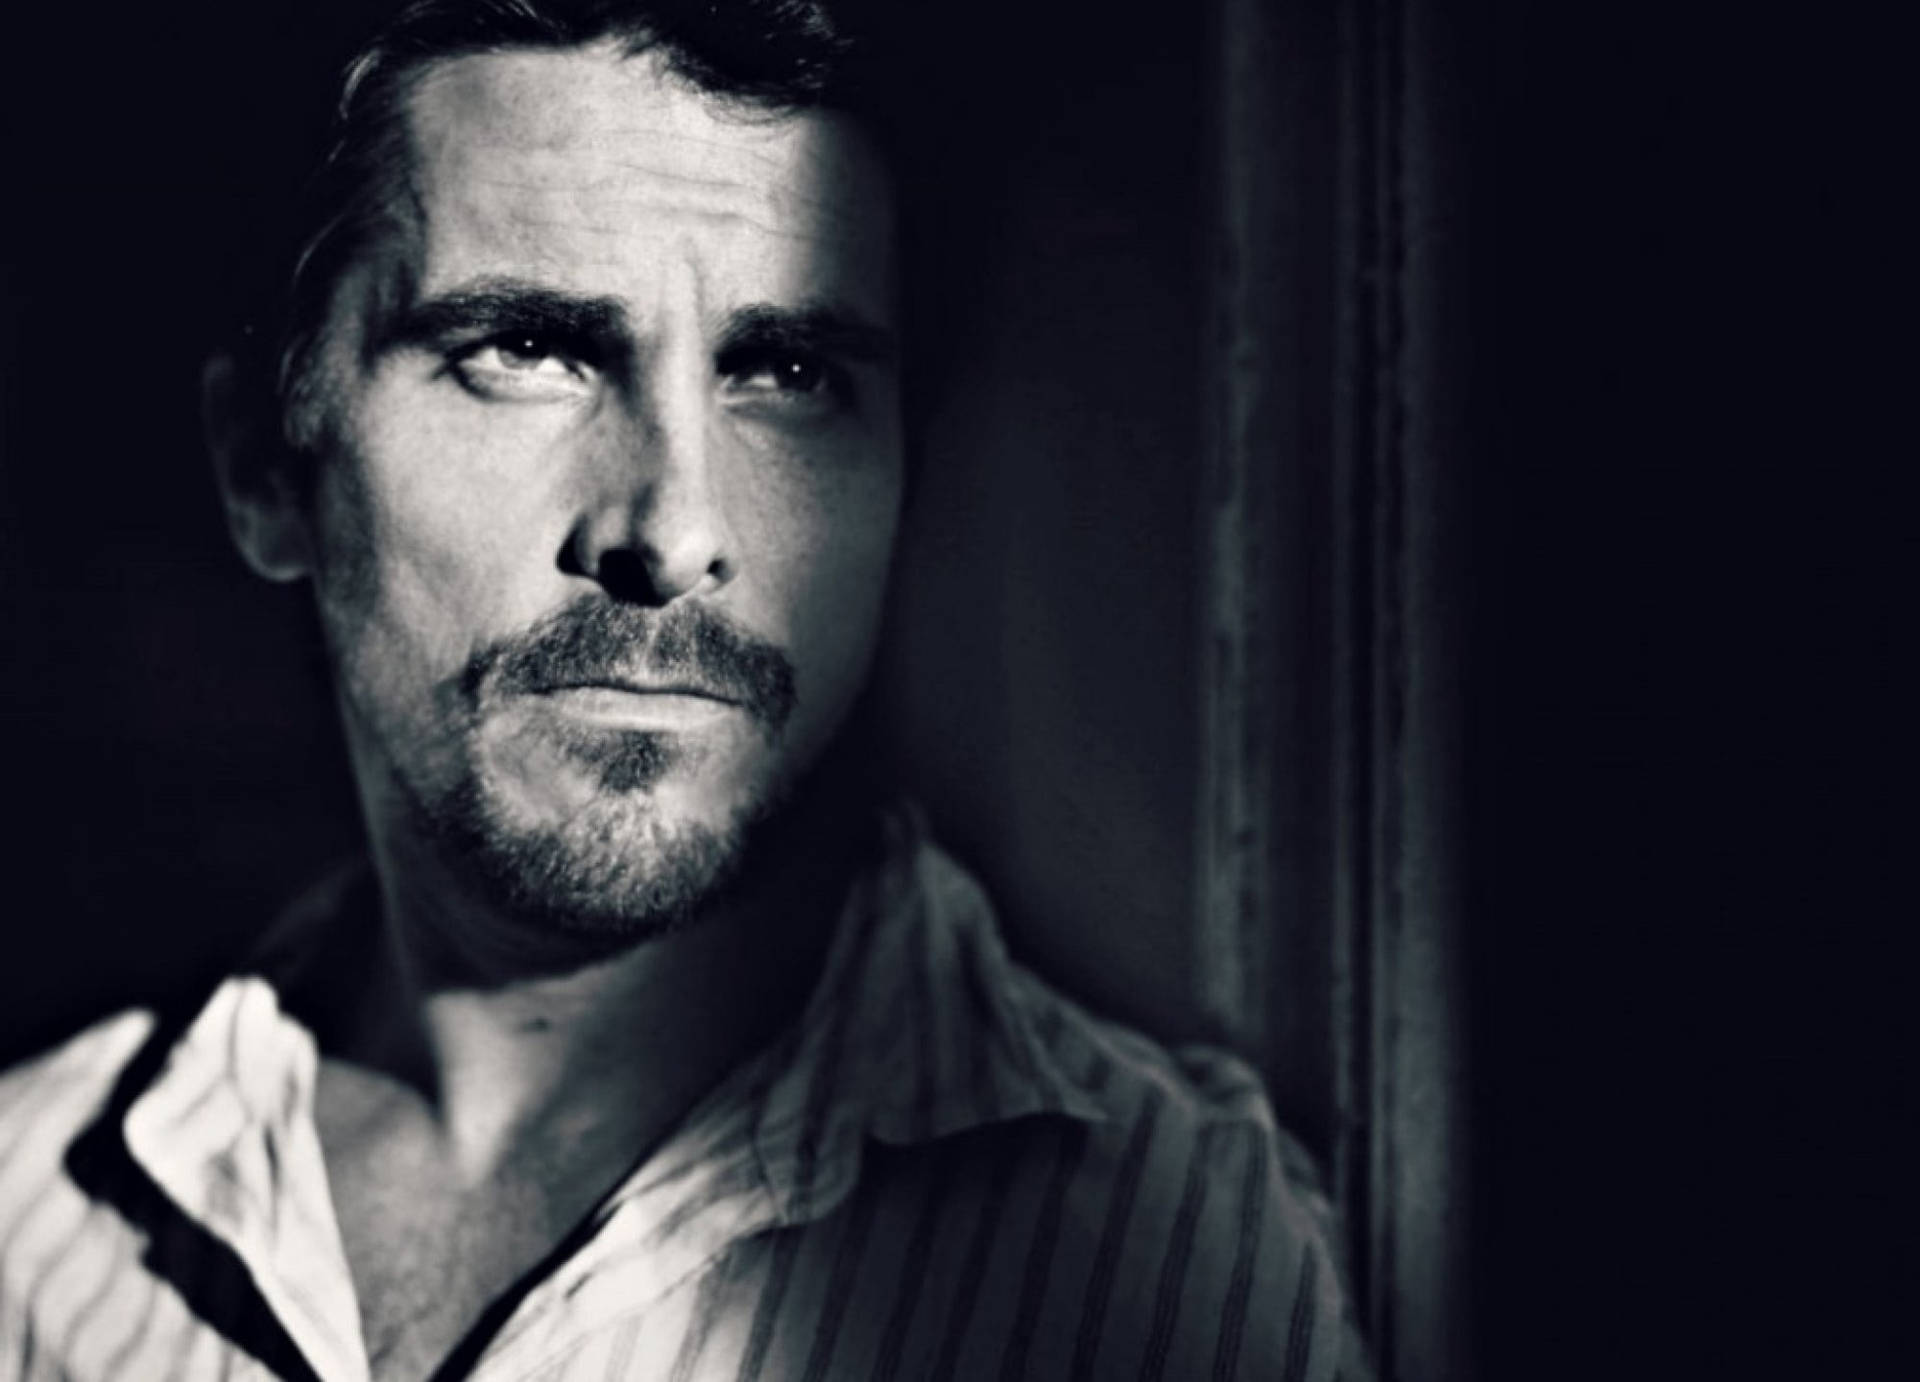 Greyscale Christian Bale Male Face Wallpaper